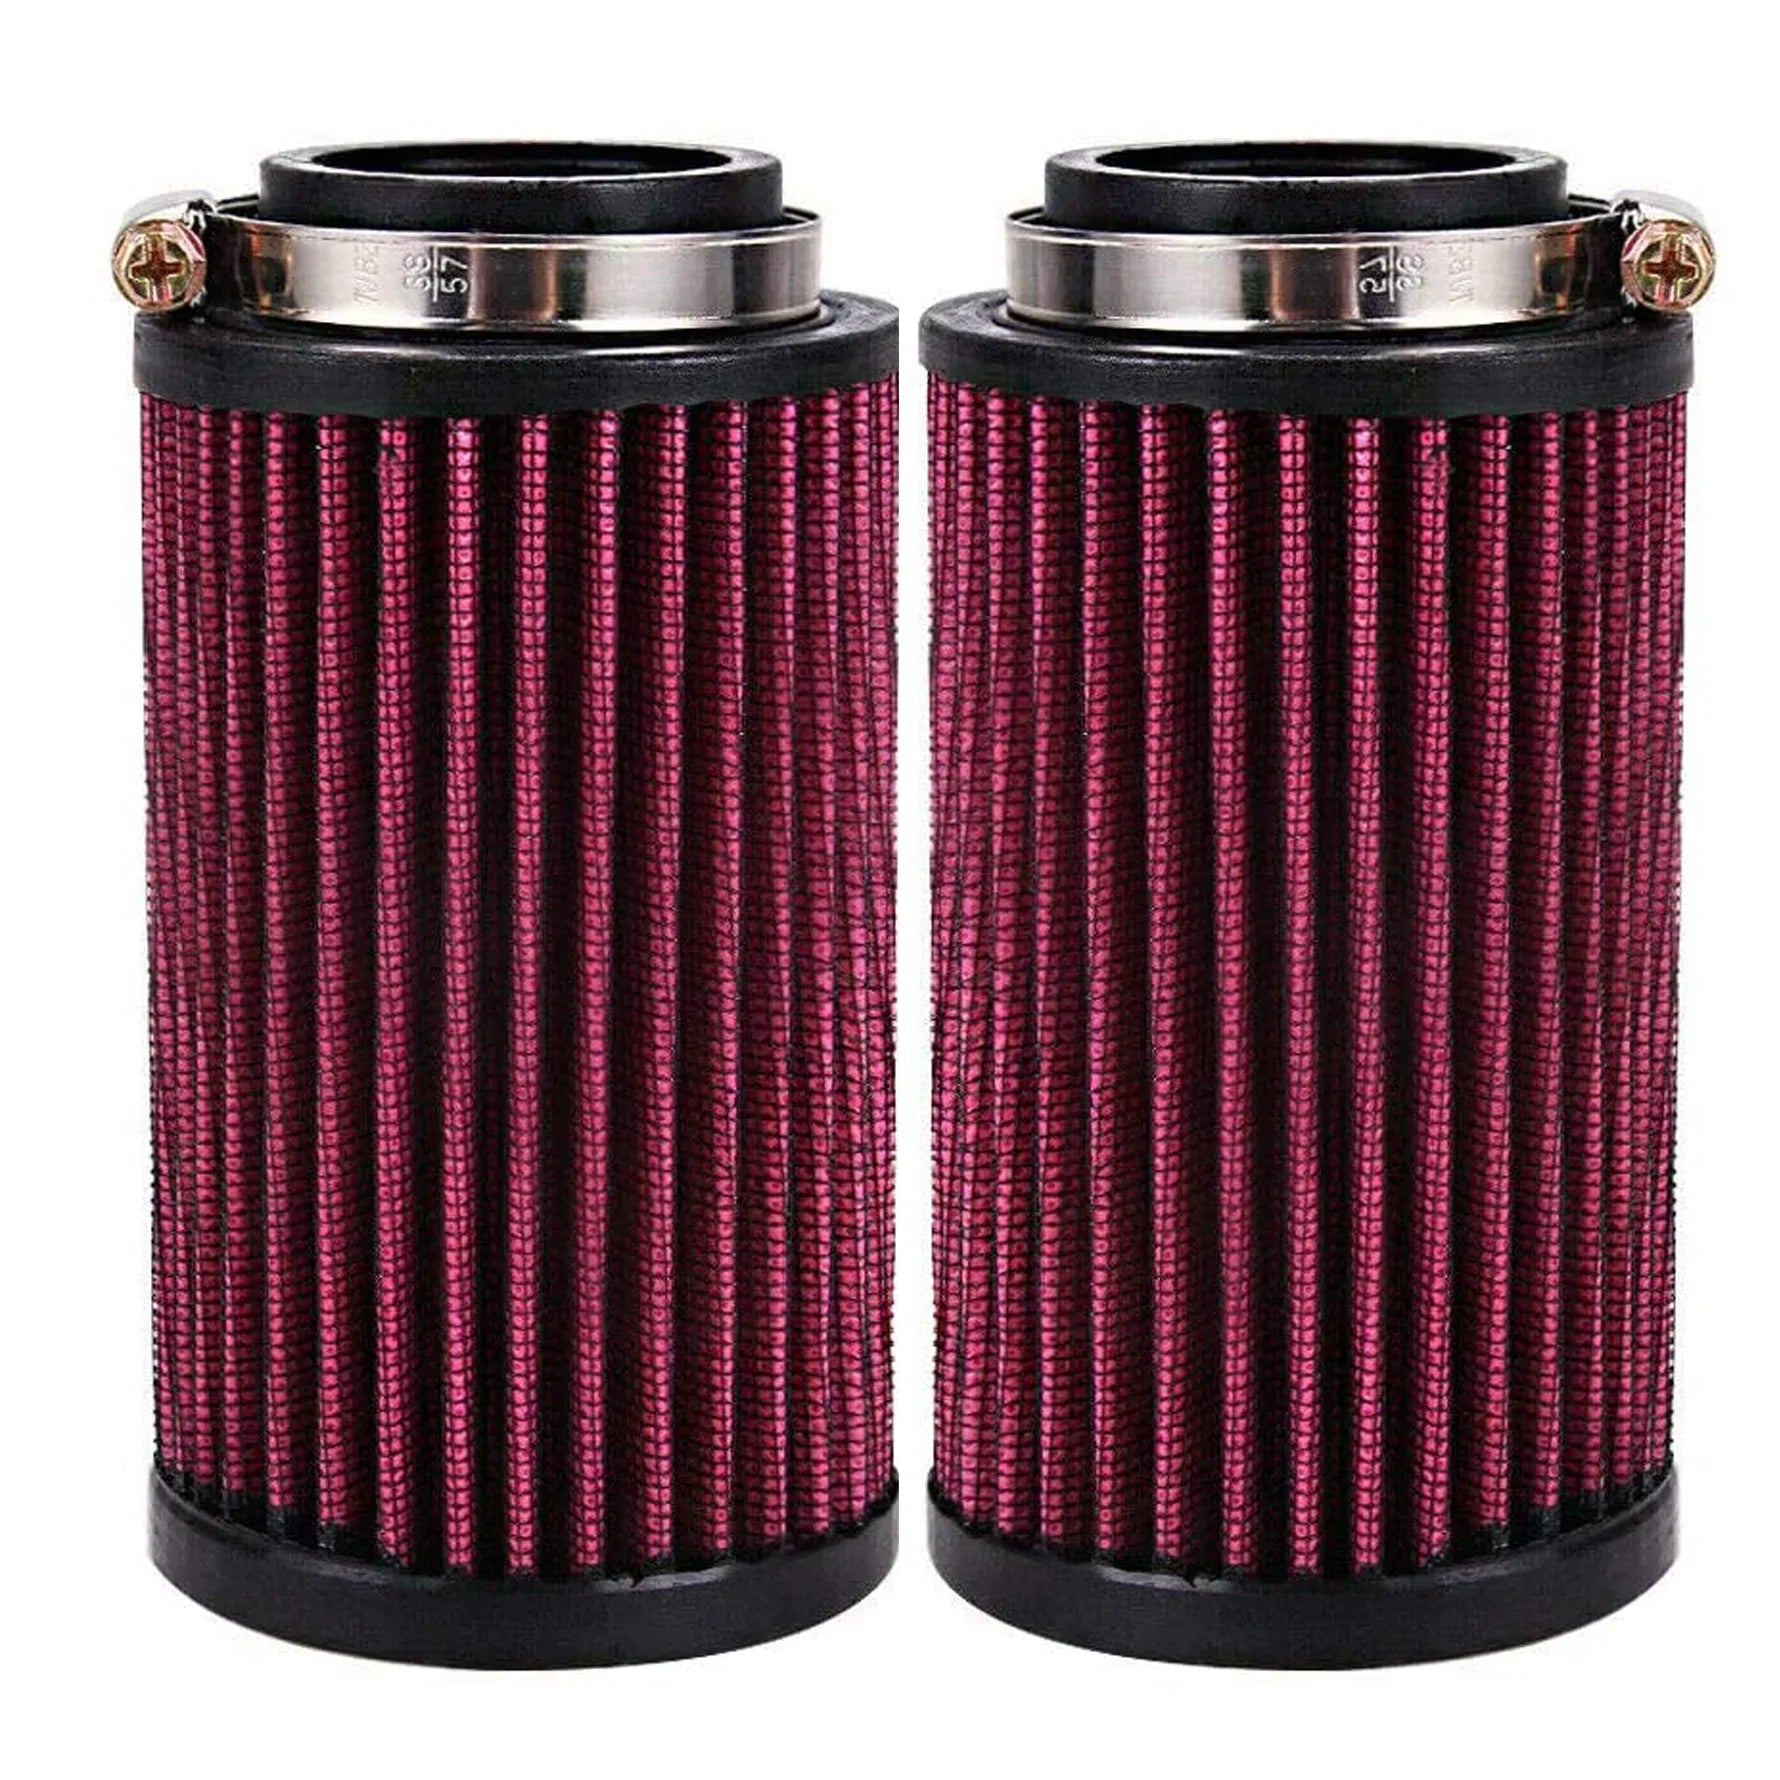 labwork 2 Air Pod Filters Stock Carb 26mm Fit for Yamaha Banshee YFZ 350 for K&N Style LAB WORK MOTO